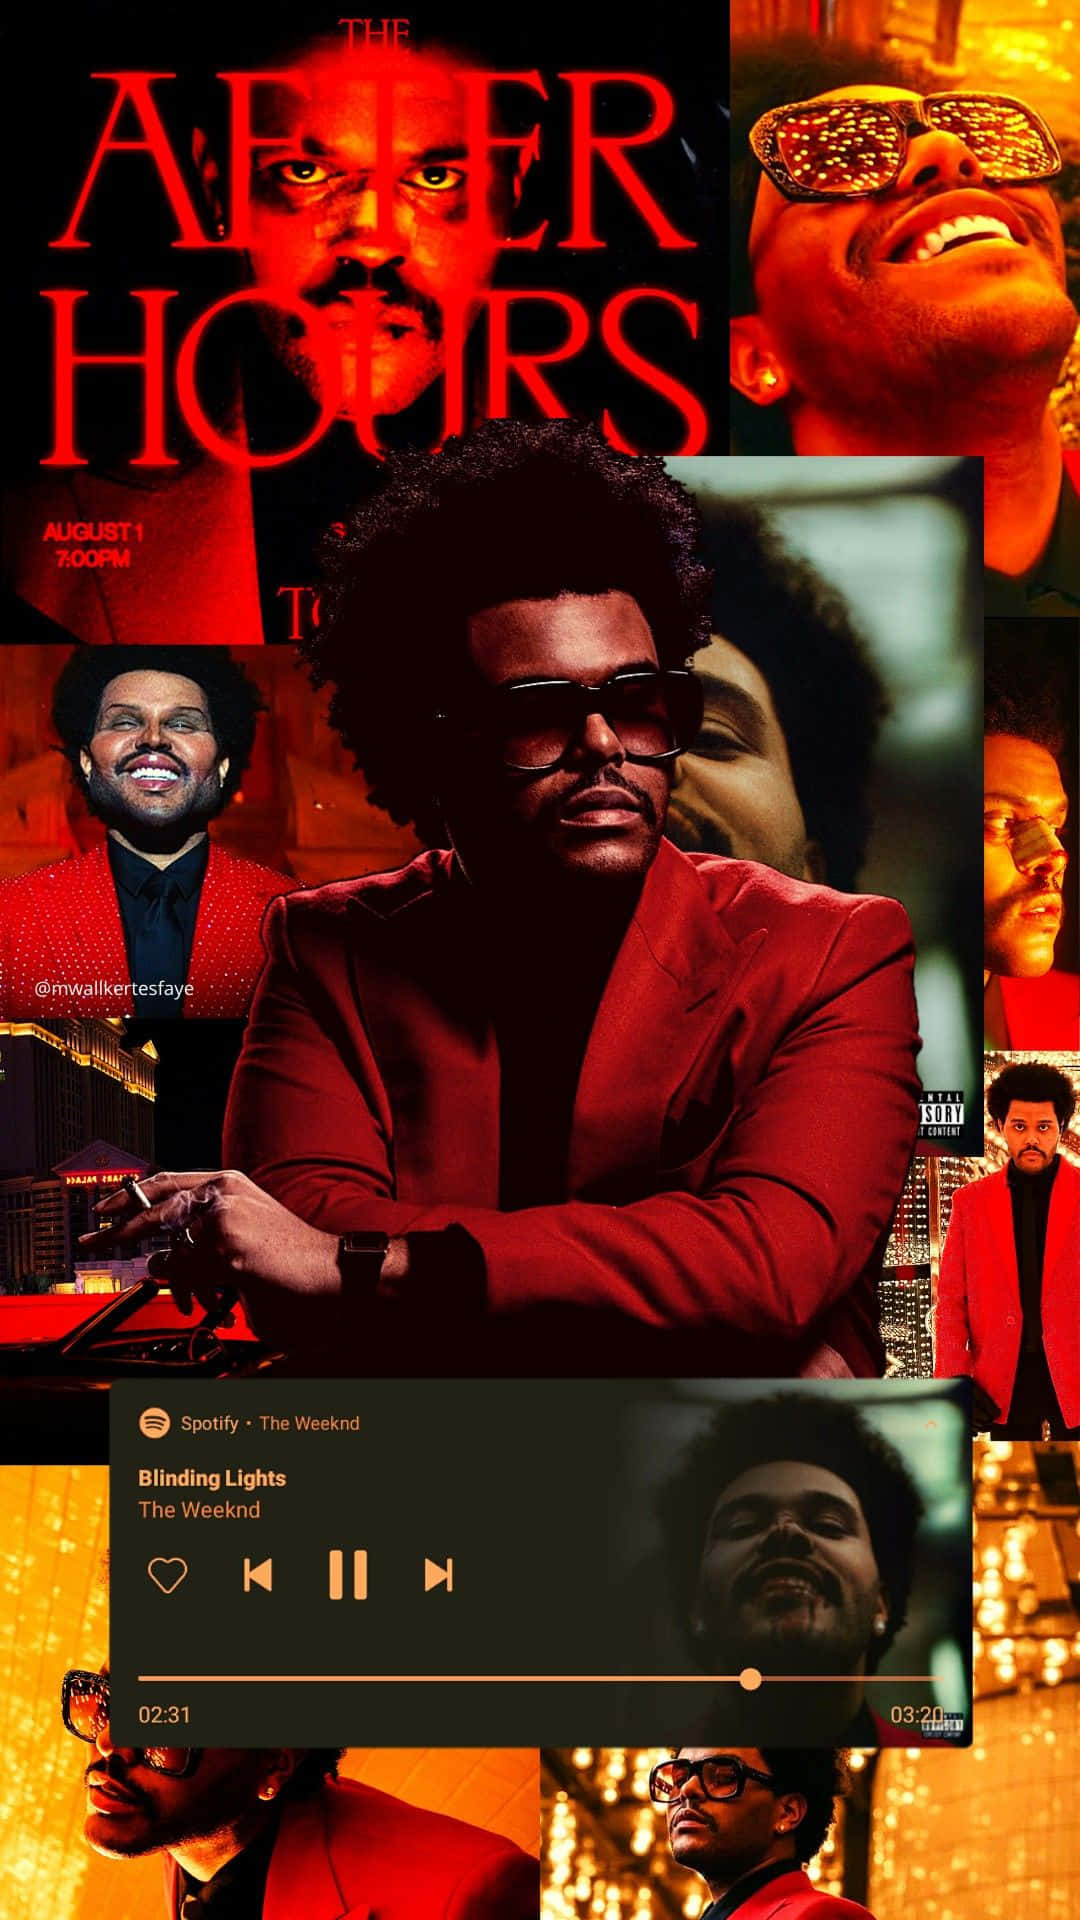 HALCYON on Twitter The The Weeknd Aesthetic aesthetic wallpaper  collage ａｅｓｔｈｅｔｉｃ aestheticedits aesthetics aestheticphotos  aestheticwallpapers TheWeeknd AfterHours httpstcosZYGX3dkF4  X